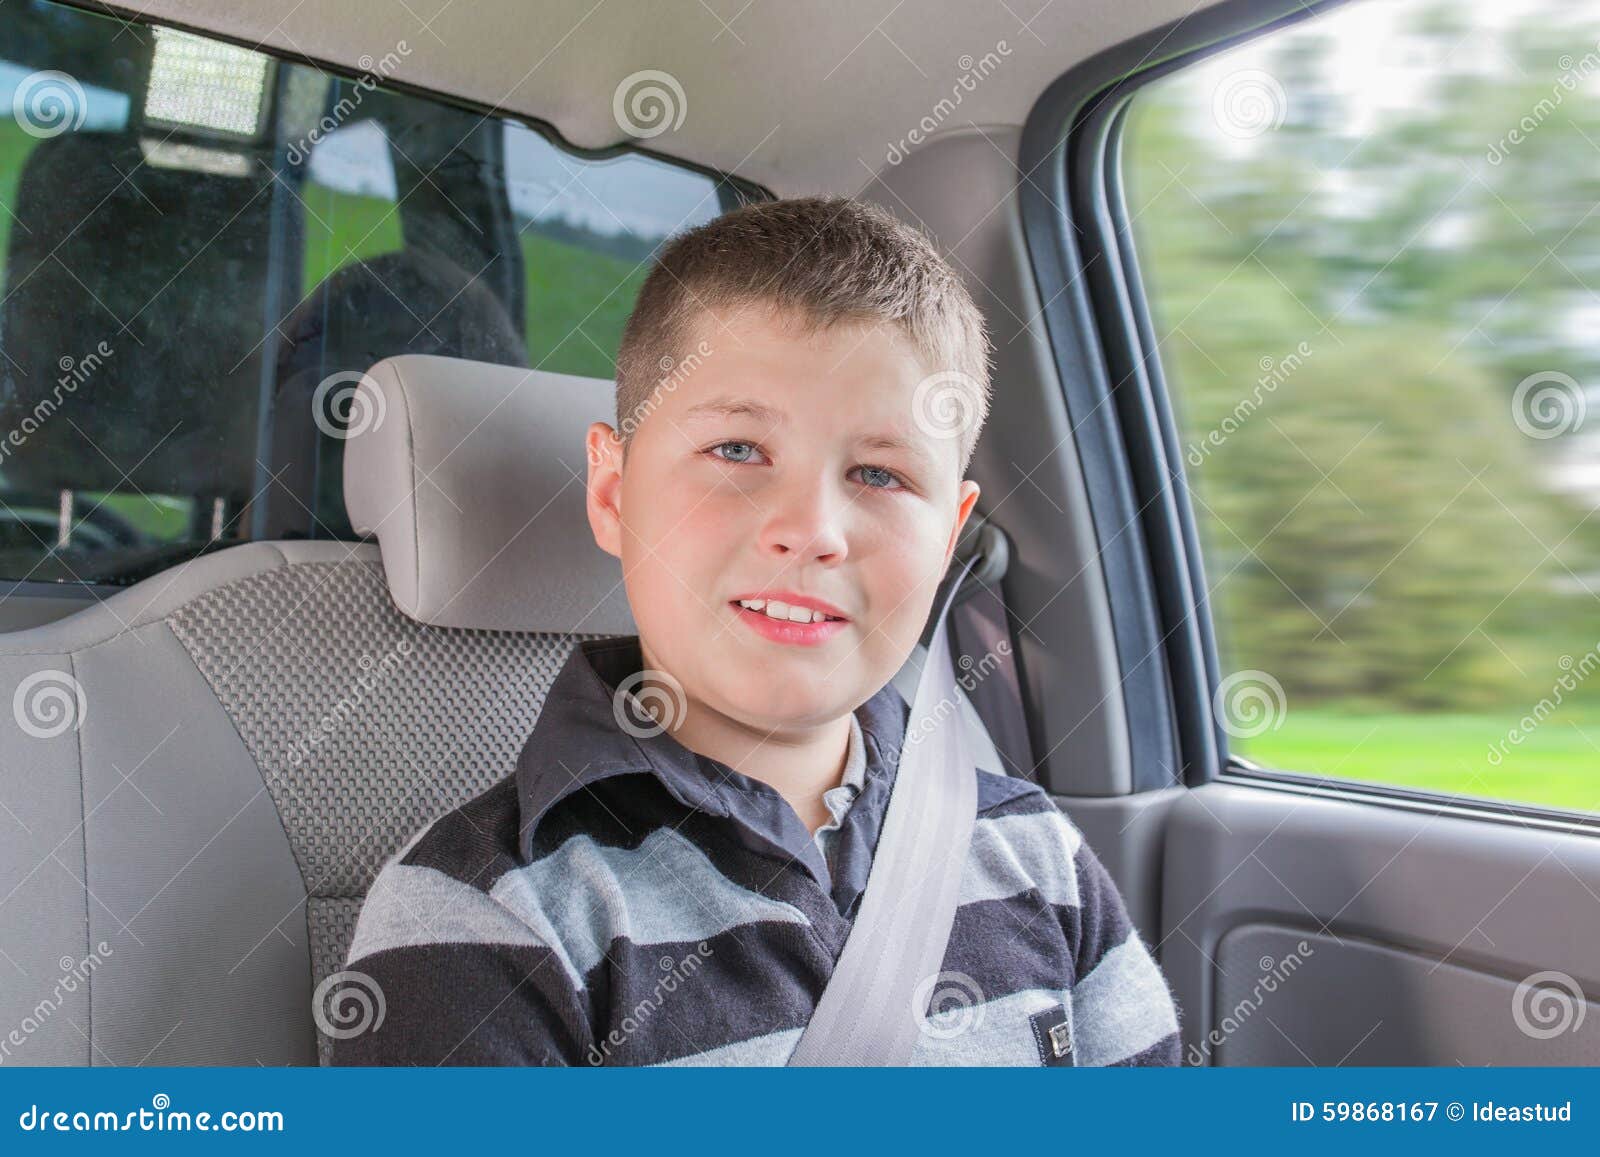 Teenager Sitting In A Car In Safety Chair Stock Image ...